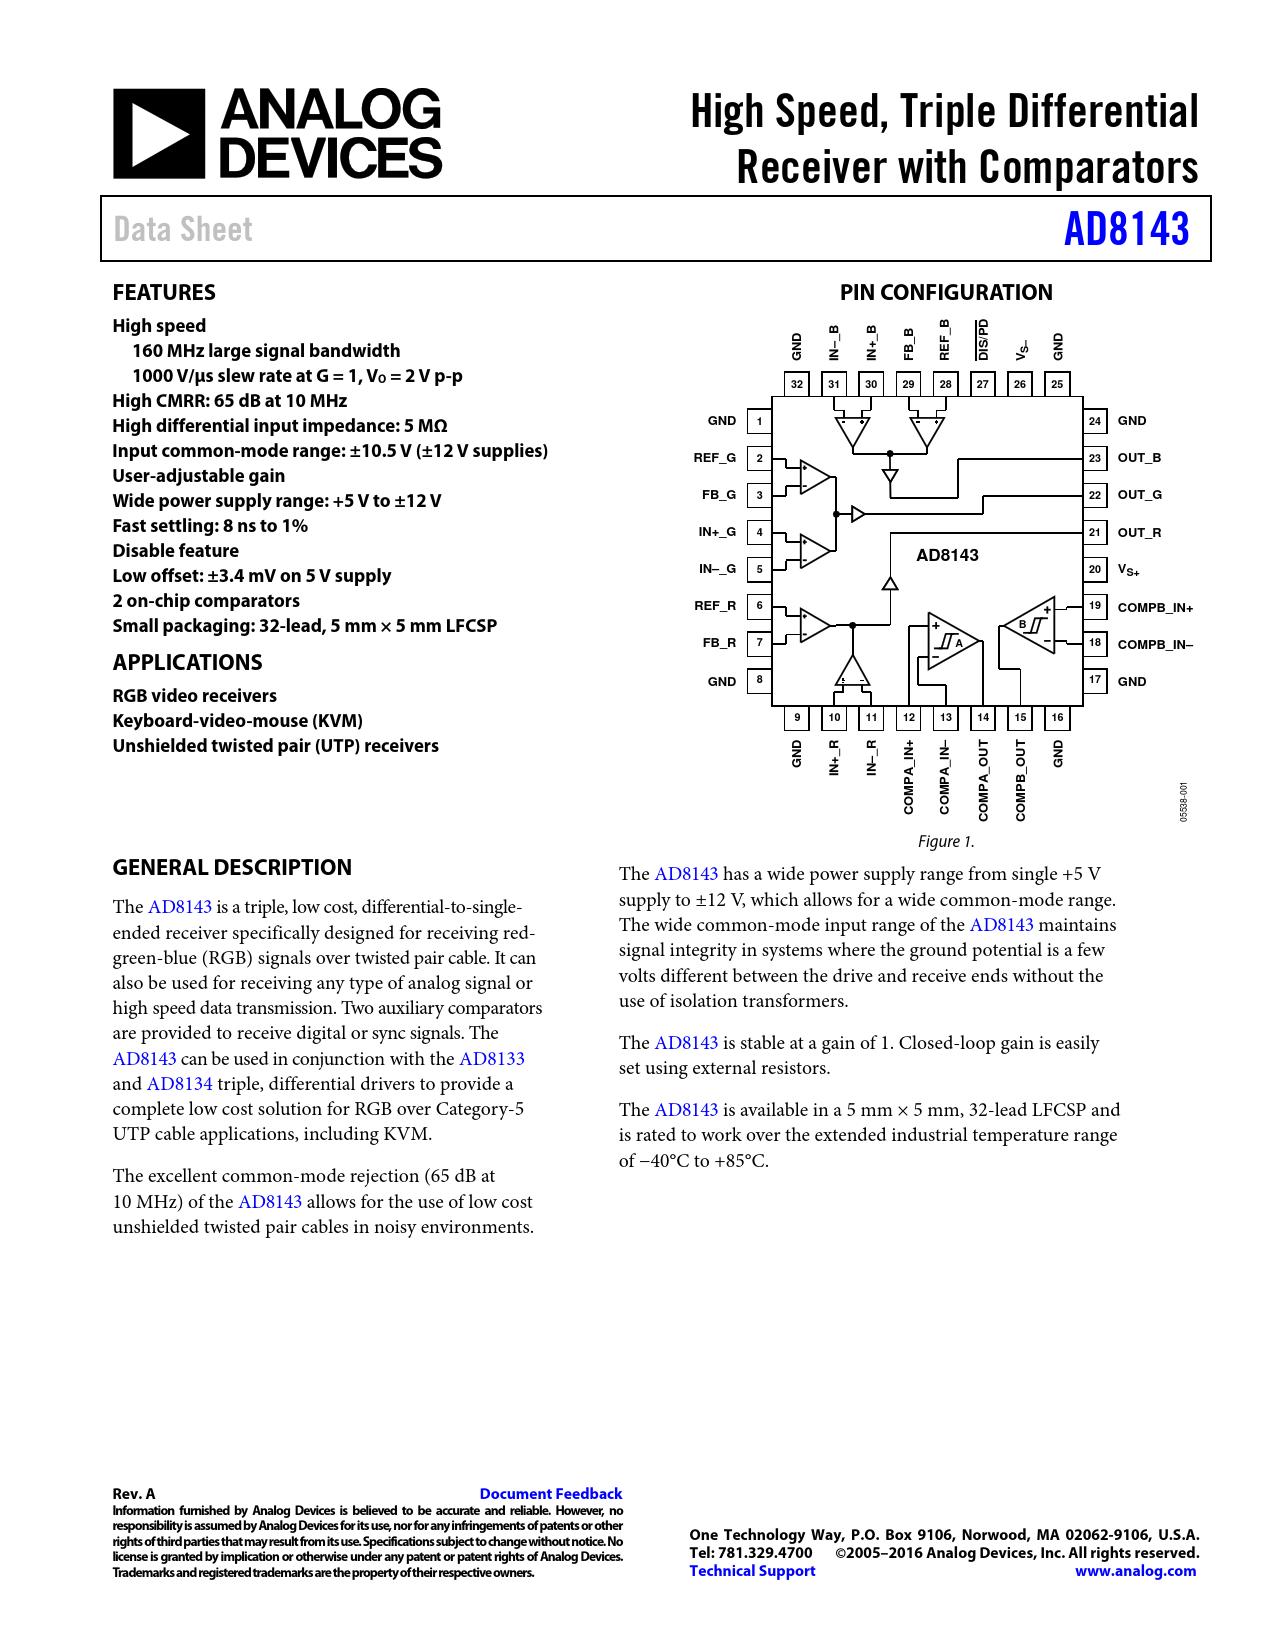 Datasheet AD8143 Analog Devices, Revision: A